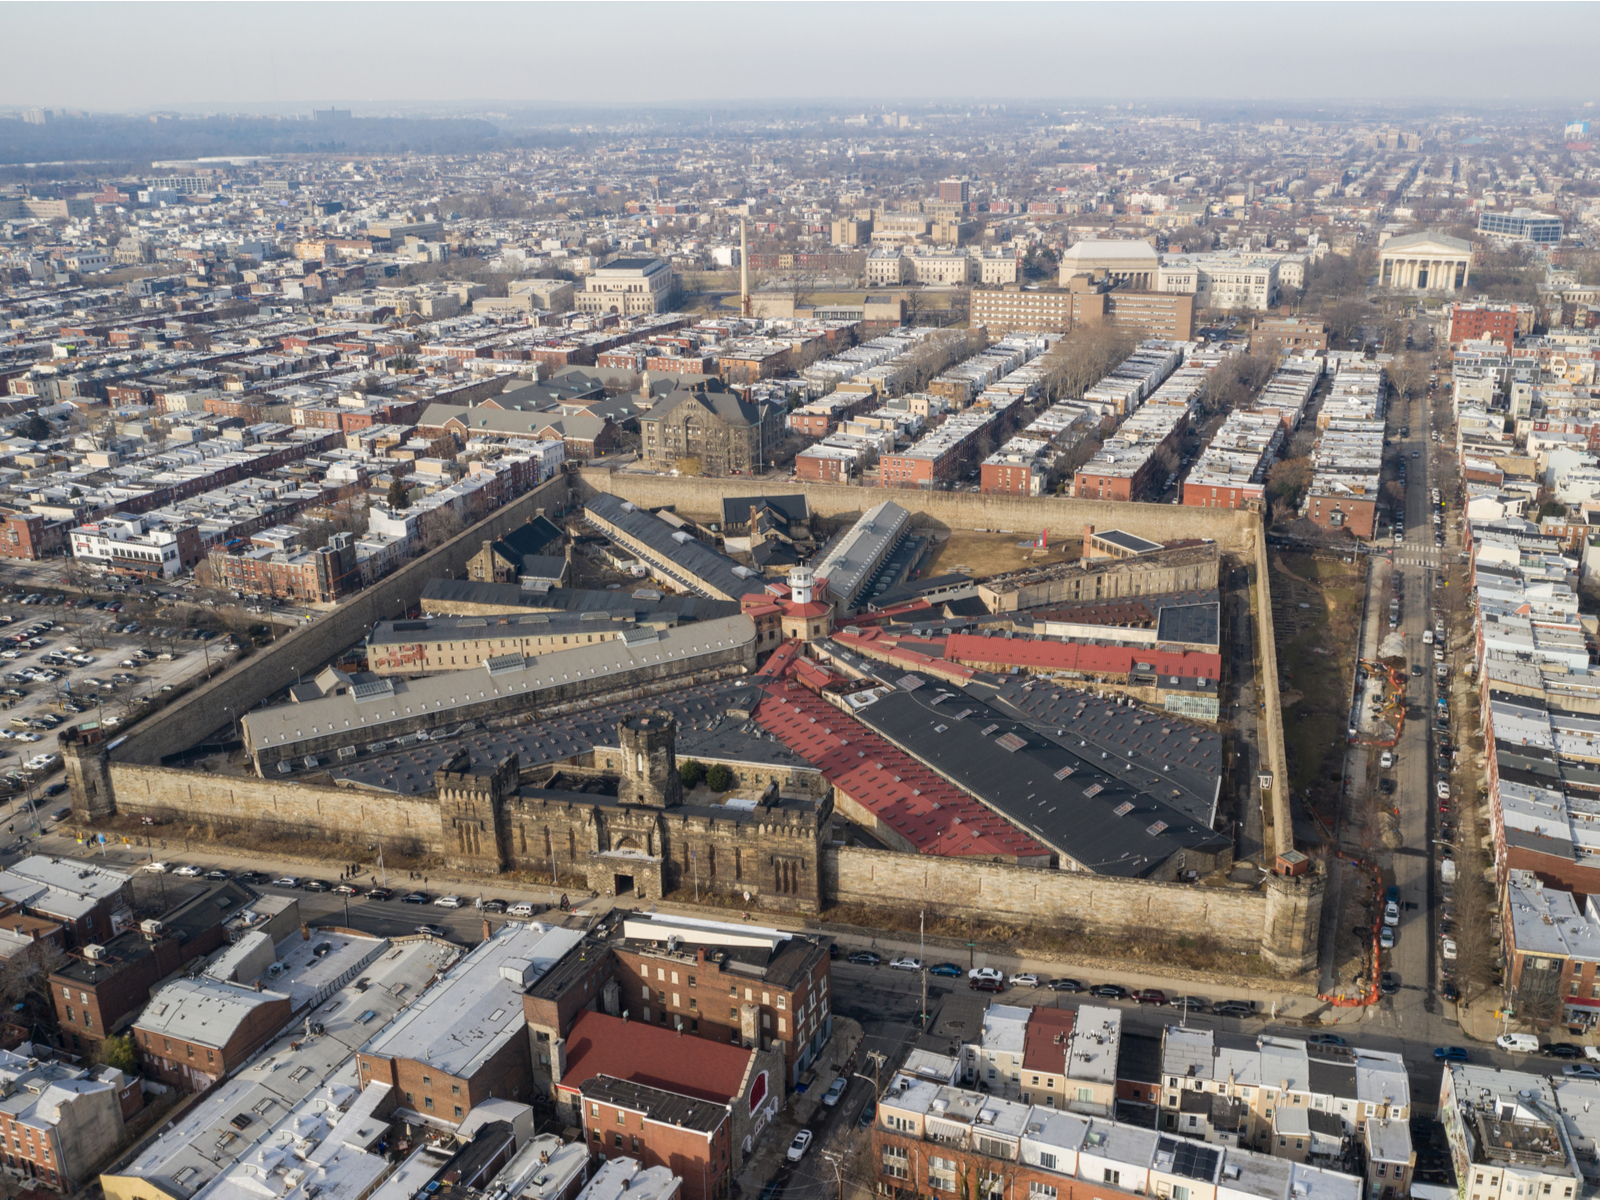 Aerial shot on one of best things to do in Pennsylvania, the vast Eastern State Penitentiary with its tall borders and downtown Philadelphia